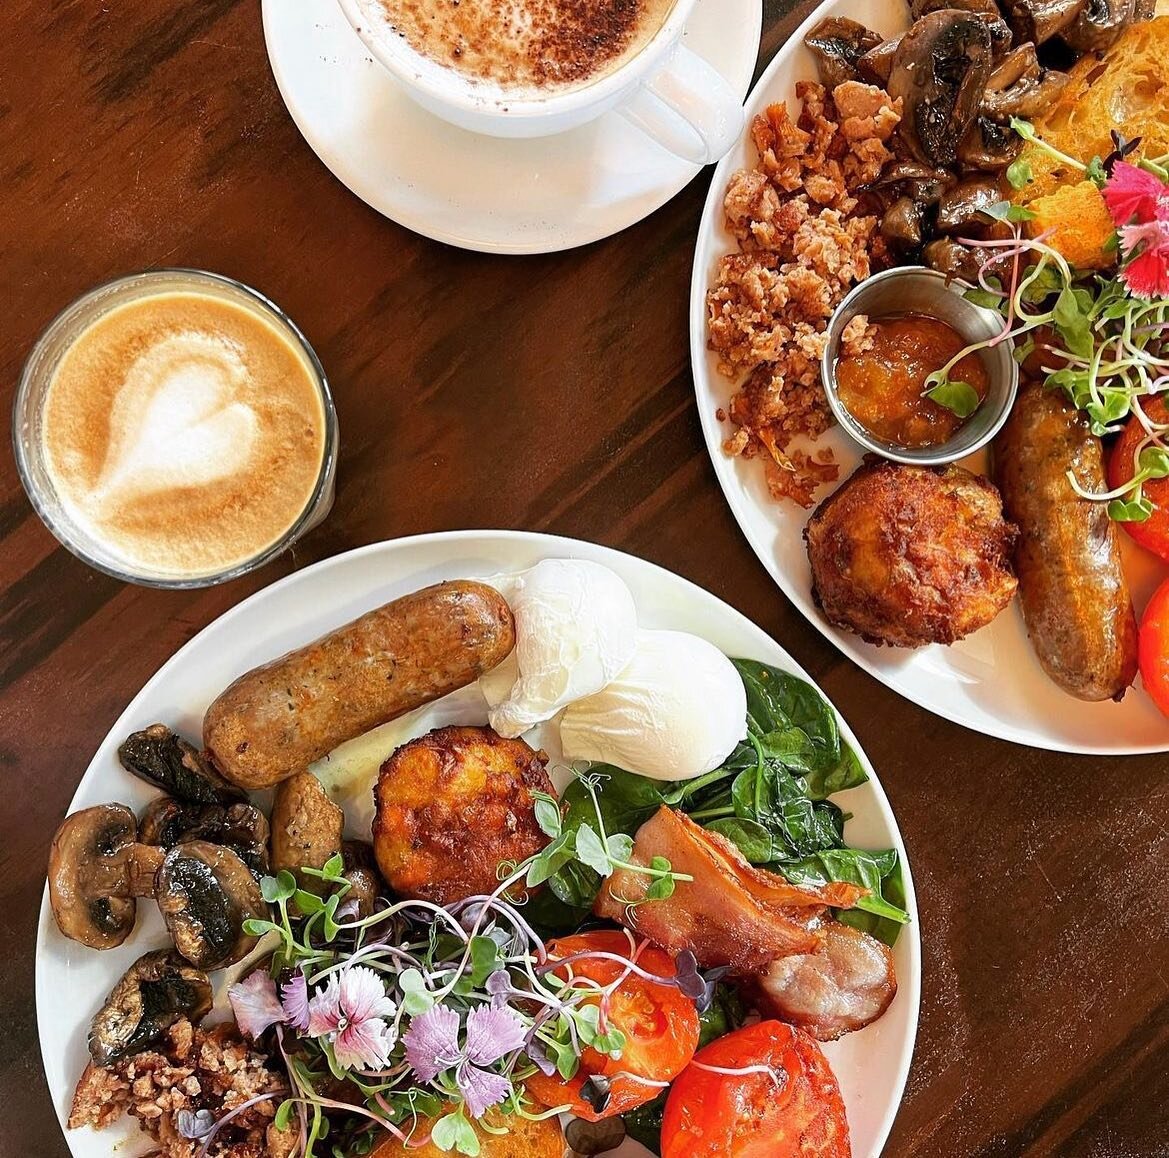 What&rsquo;s your go to?
For us it&rsquo;s a Wainui Big Breakfast - or two🐷
See you soon!
.
.
.
.
.
📷 @adelaide.eat